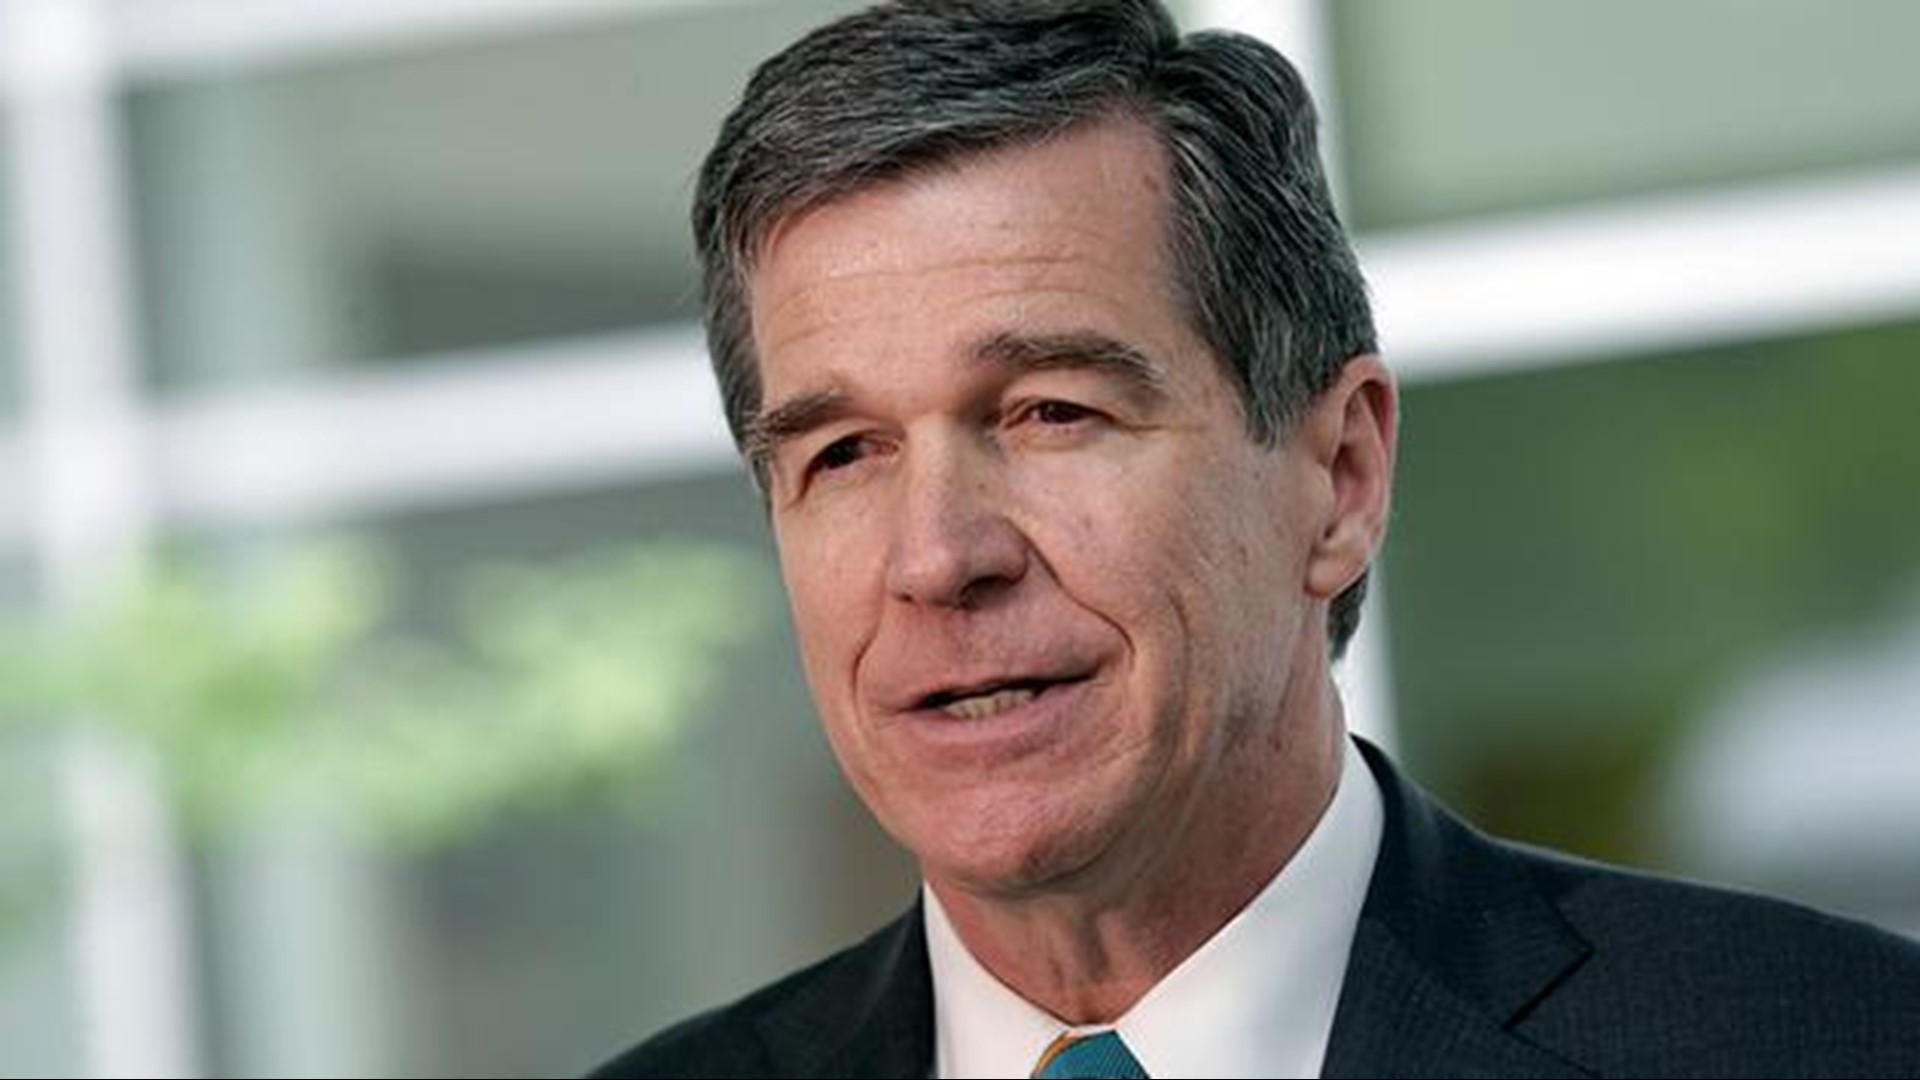 North Carolina Governor Roy Cooper, in an interview with WCNC Charlotte, discusses his coronavirus response and preparations for Phase One of the state's reopening.